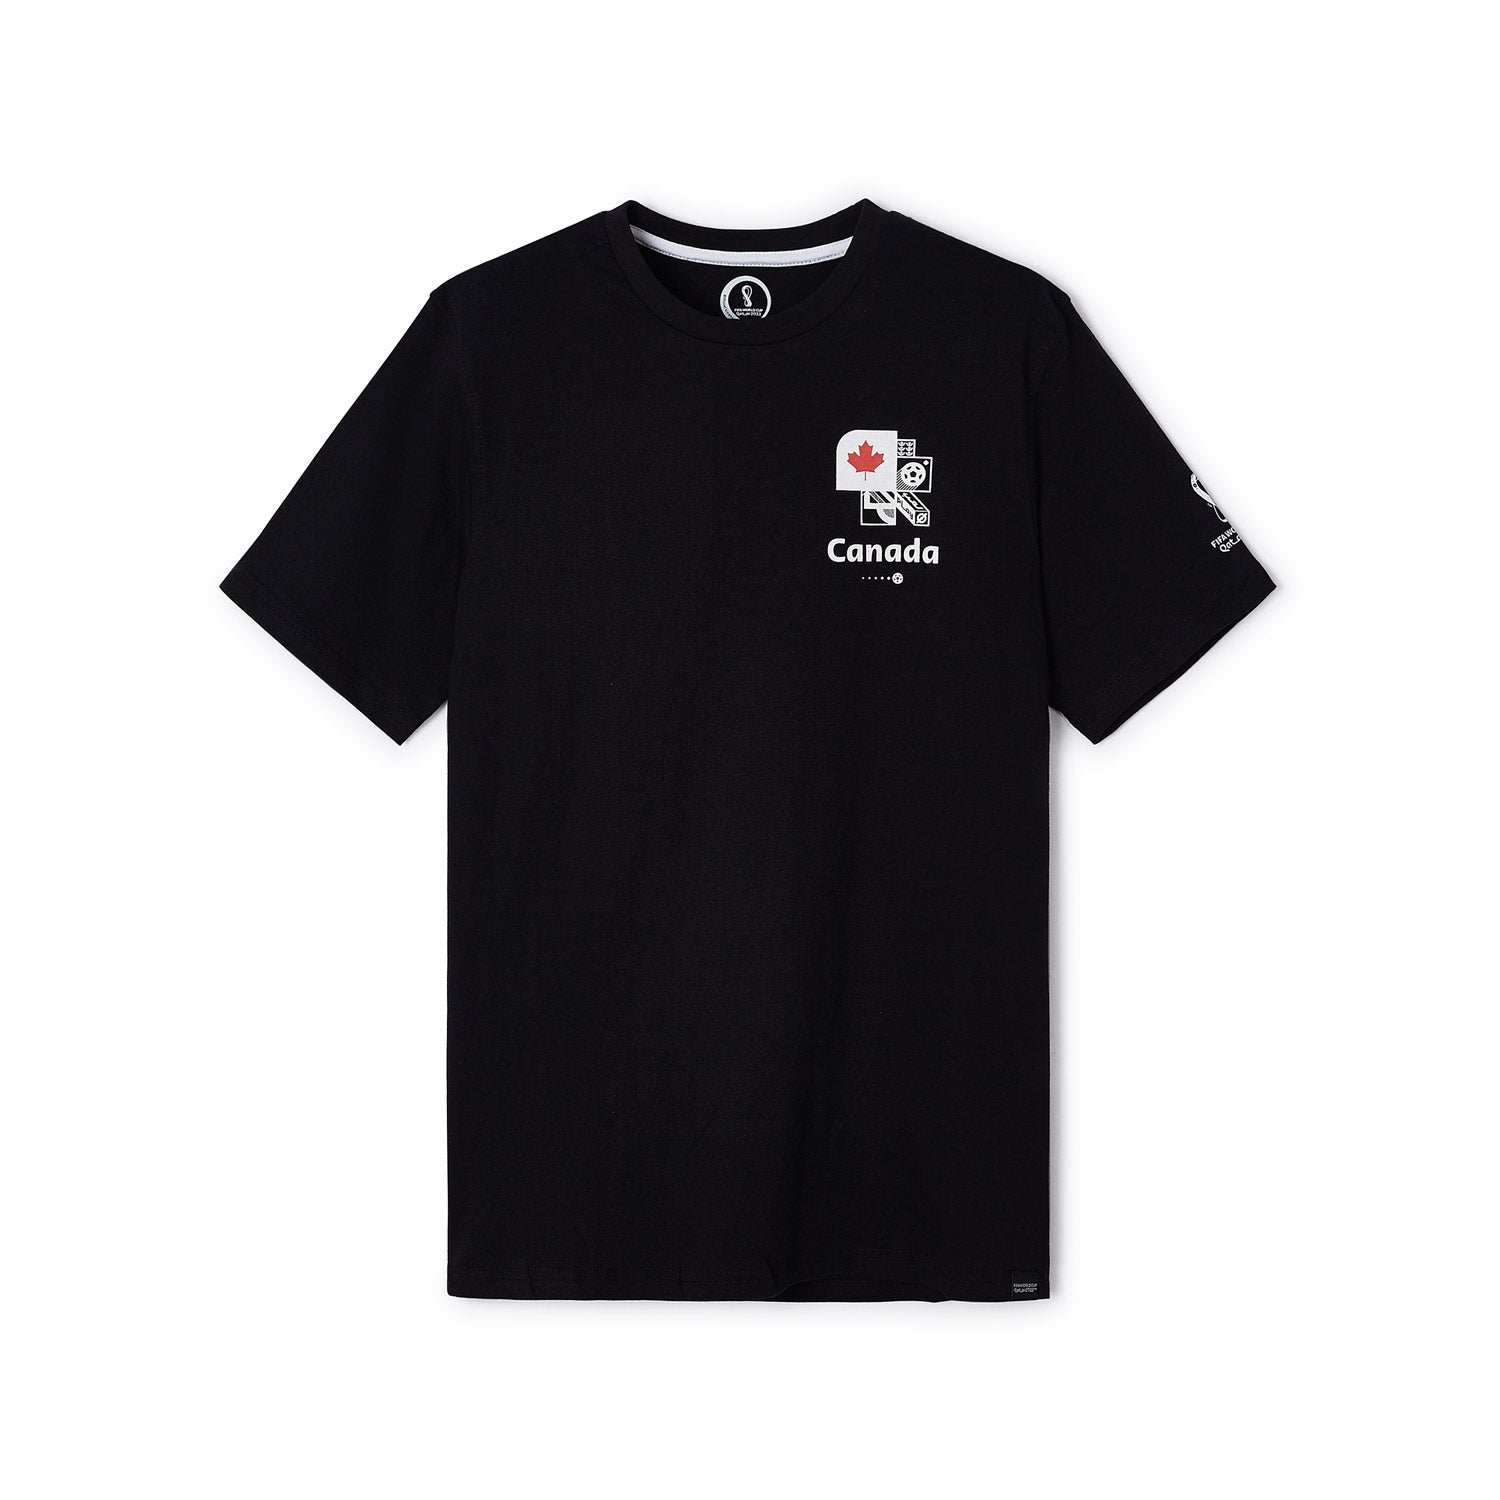 2022 World Cup Canada Black T-Shirt - Men's - Official FIFA Store